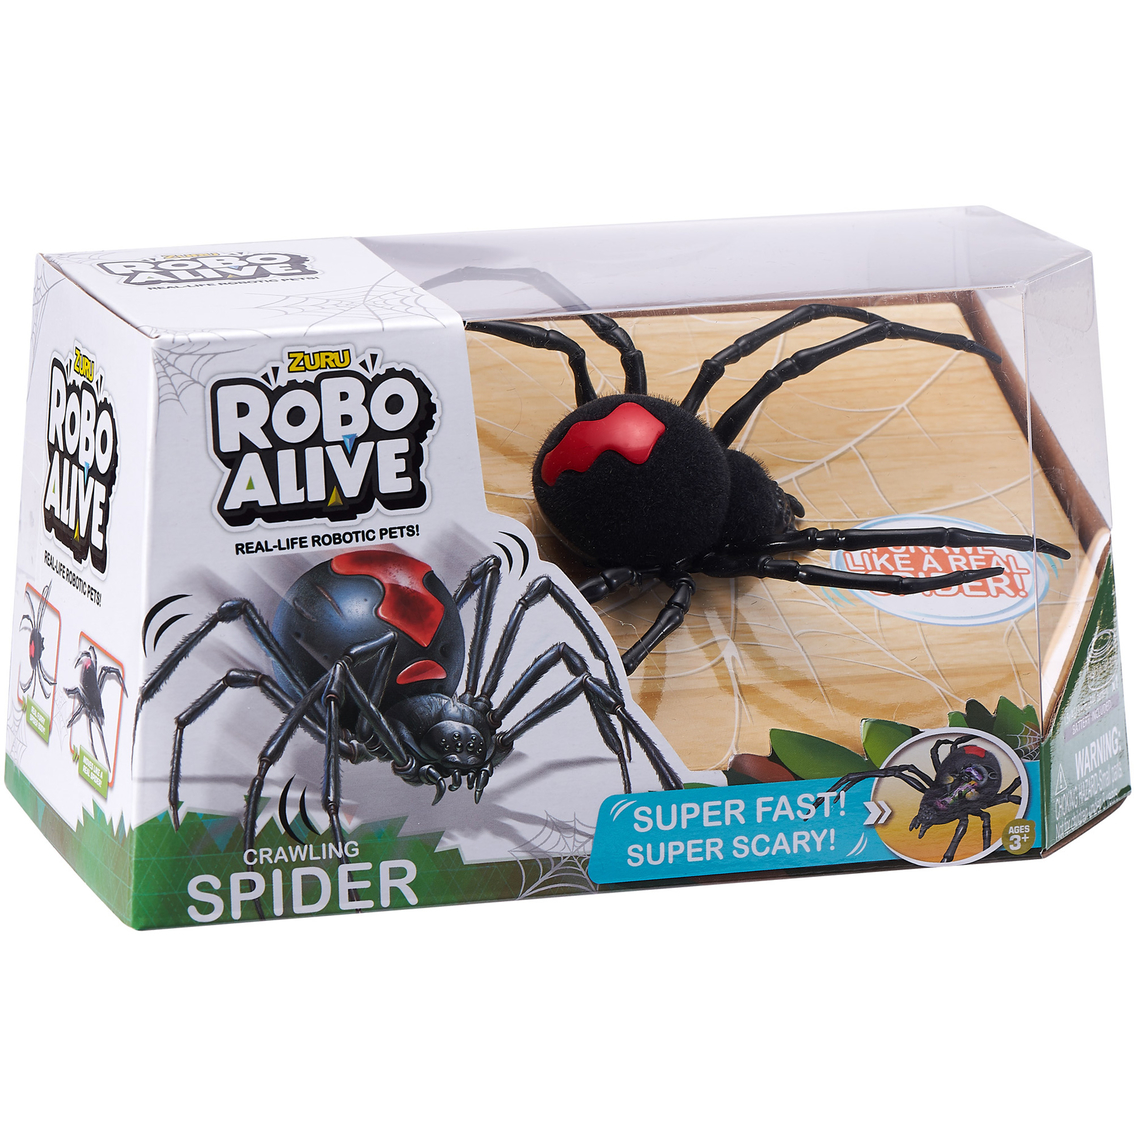 Robo Alive Crawling Spider Battery-powered Robotic Toy by ZURU for sale online 